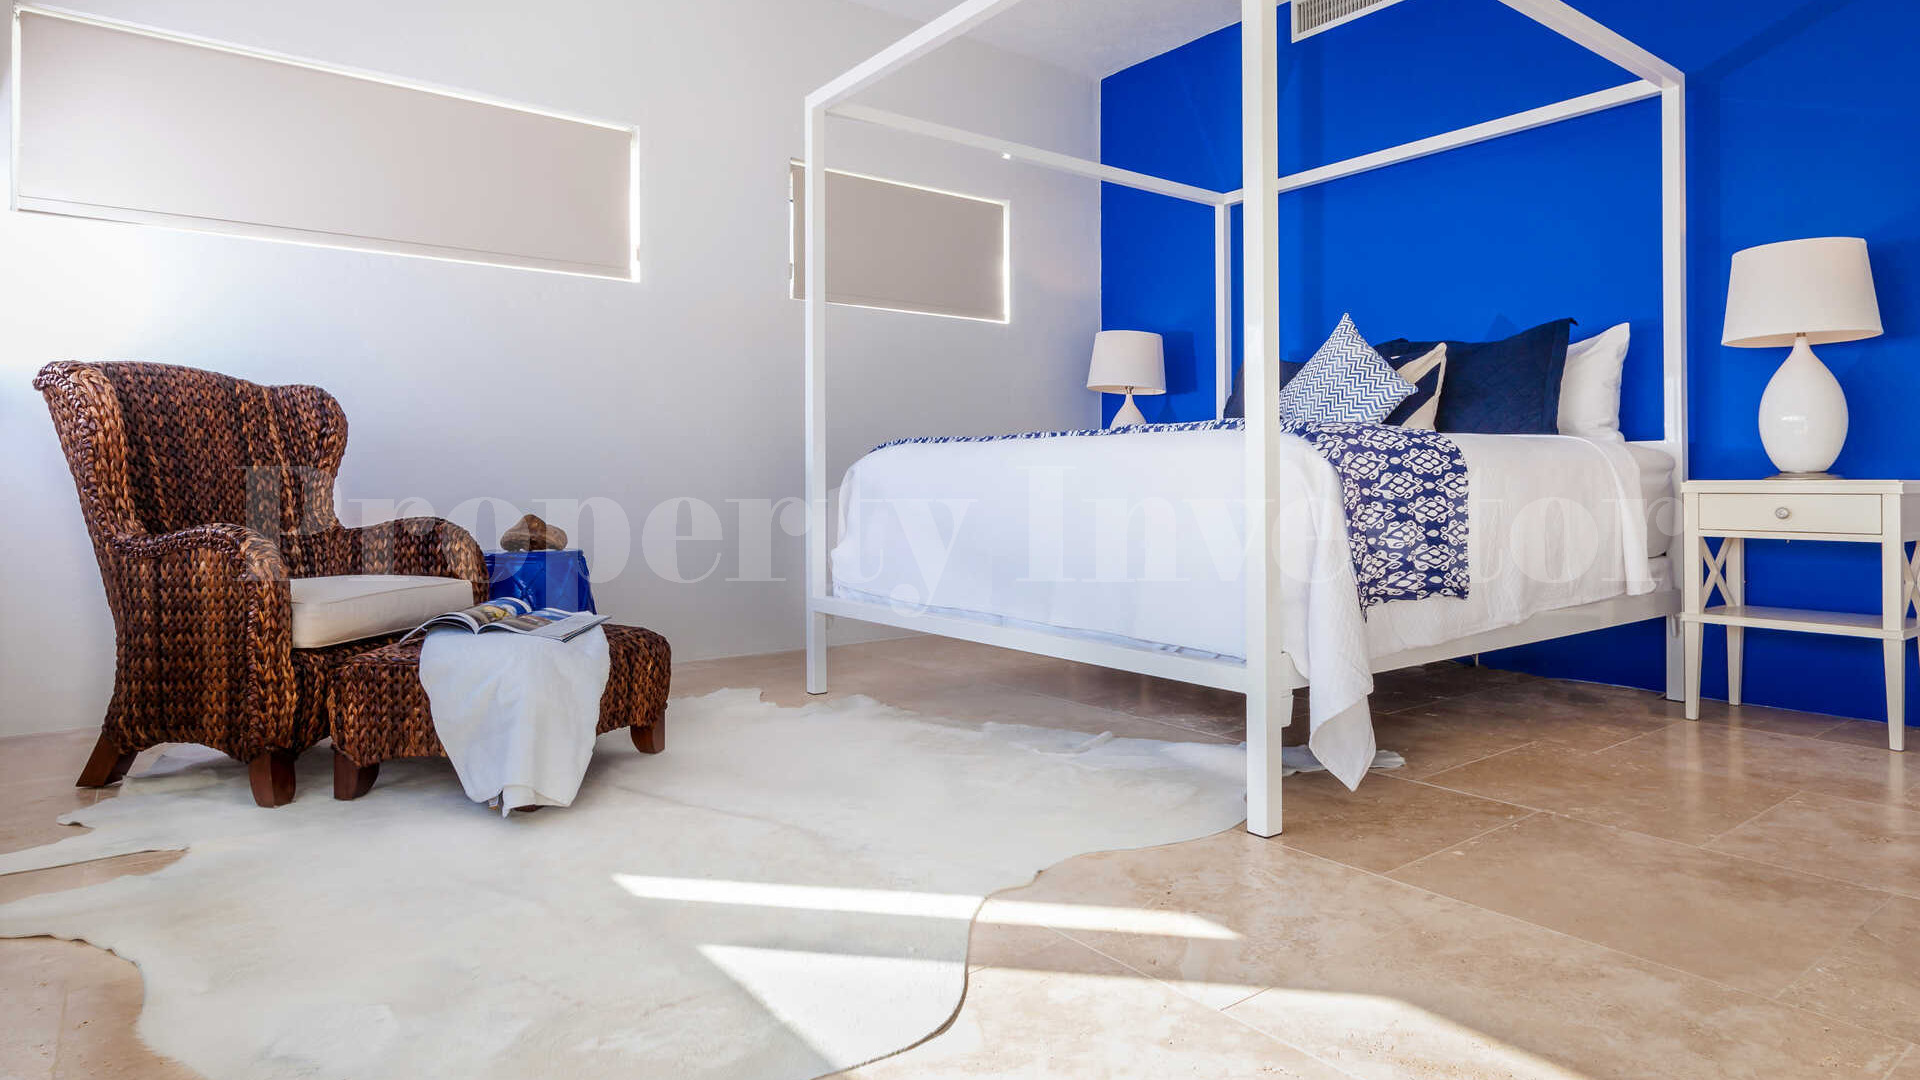 Chic 5 Bedroom Luxury Beachfront Villa at Blowing Point, Anguilla